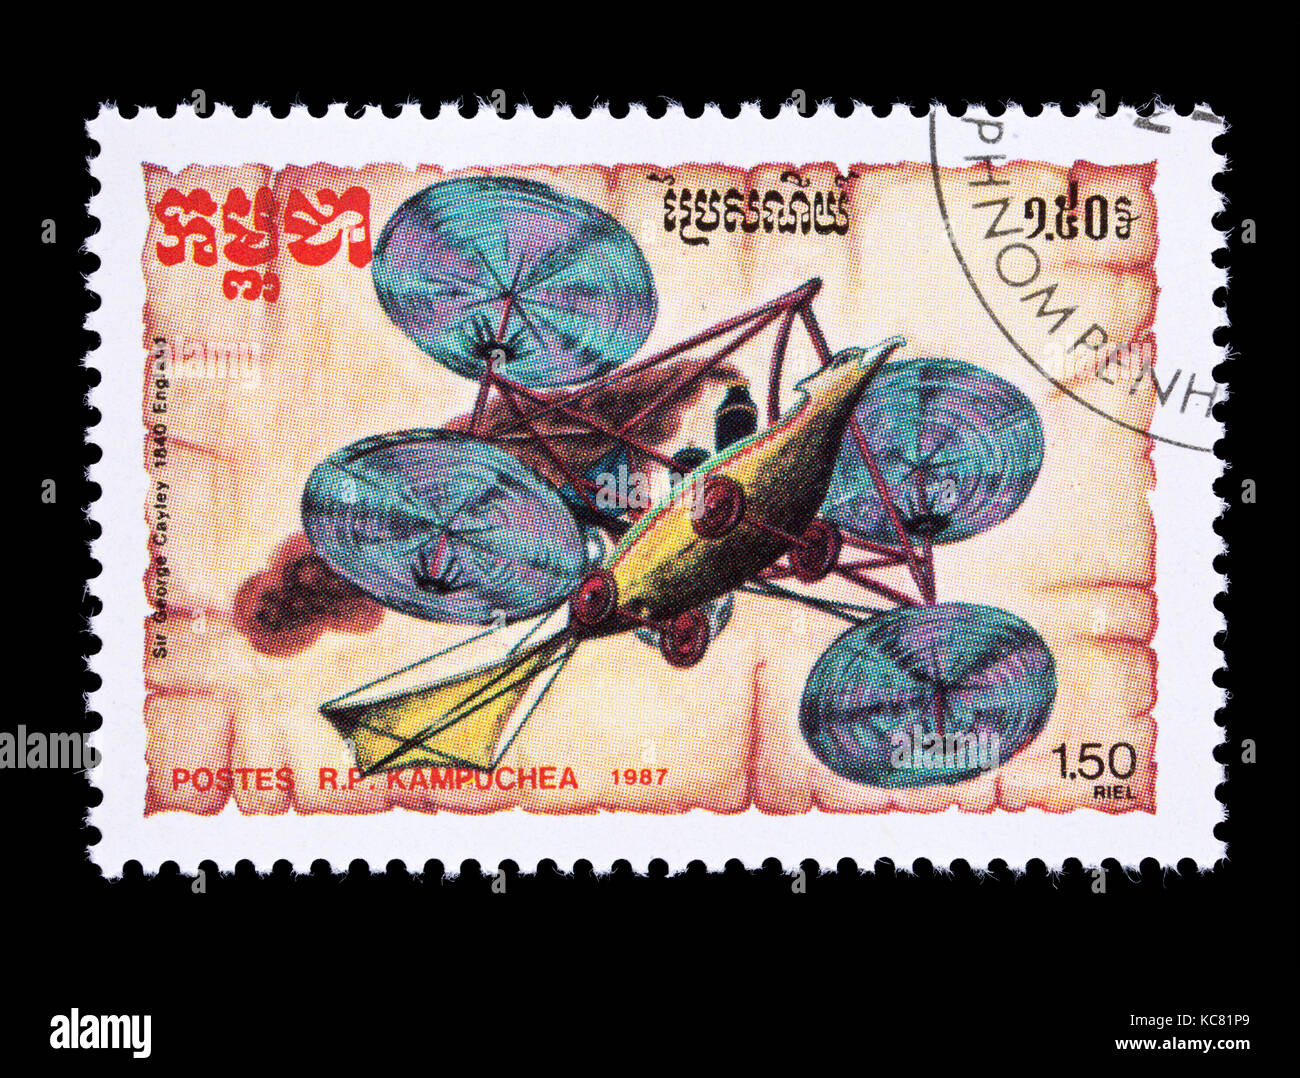 Postage stamp from Cambodia (Kampuchea)depicting an early airplane design by Sir George Cayley, 1840 Stock Photo